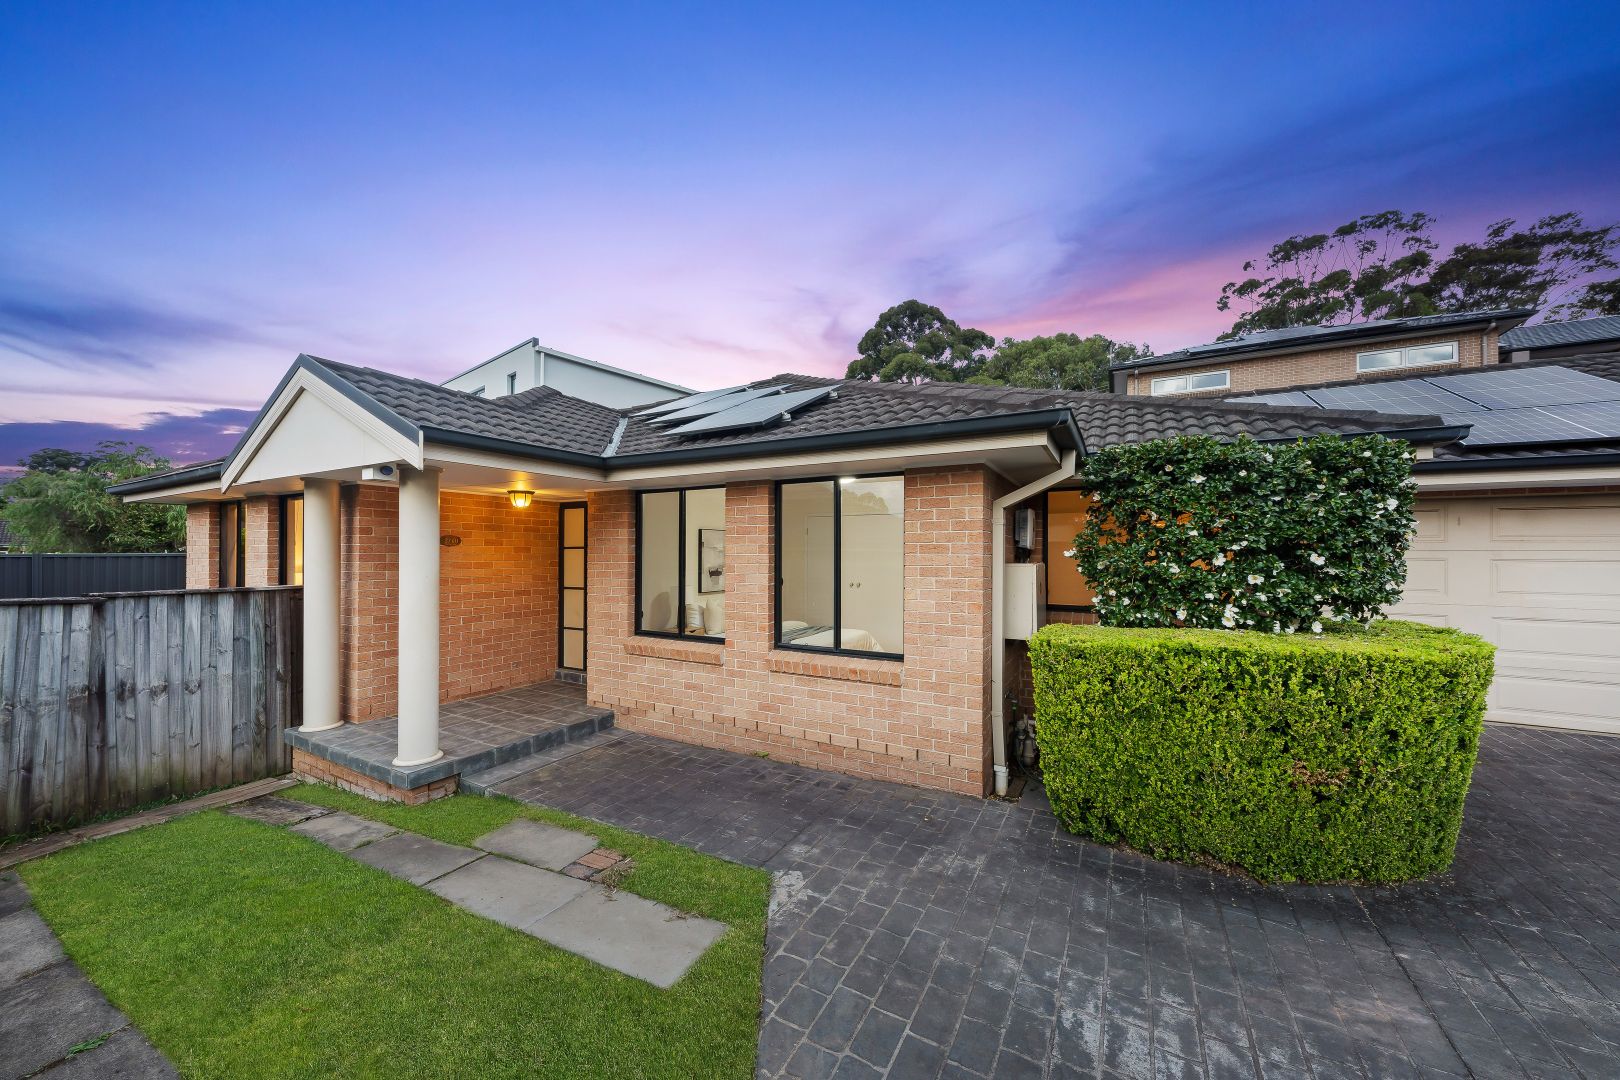 2/40 Lovell Road, Eastwood NSW 2122